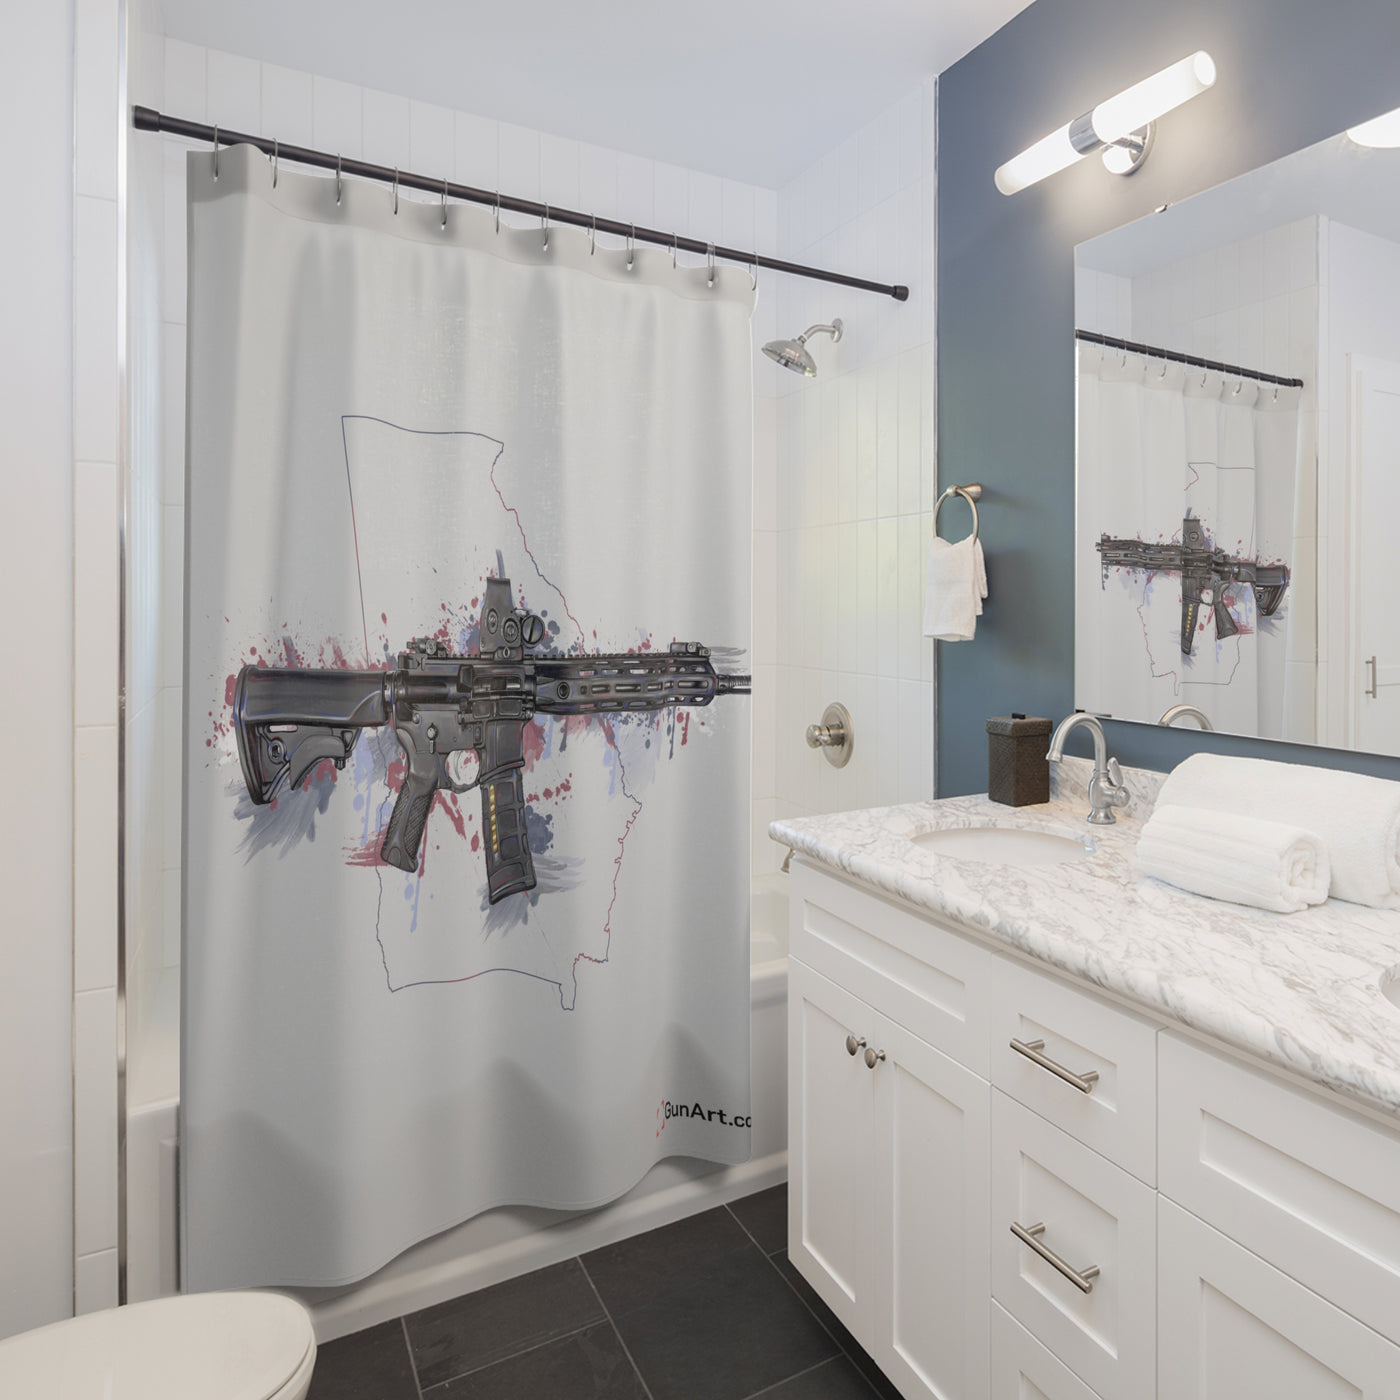 Defending Freedom - Georgia - AR-15 State Shower Curtains - Colored State